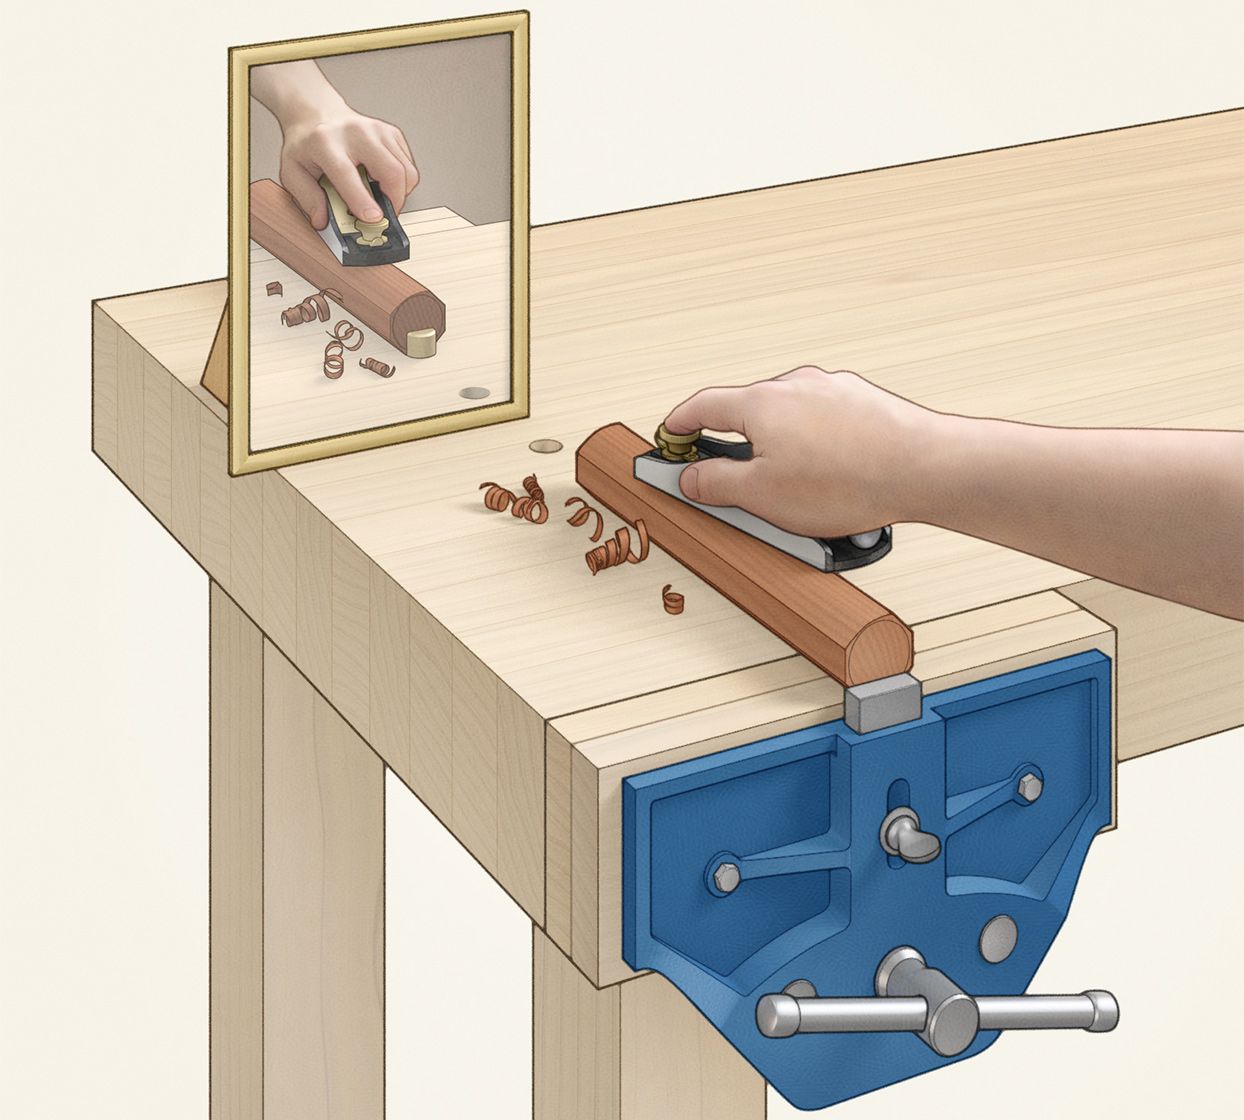 Mirror reflecting hand plane project